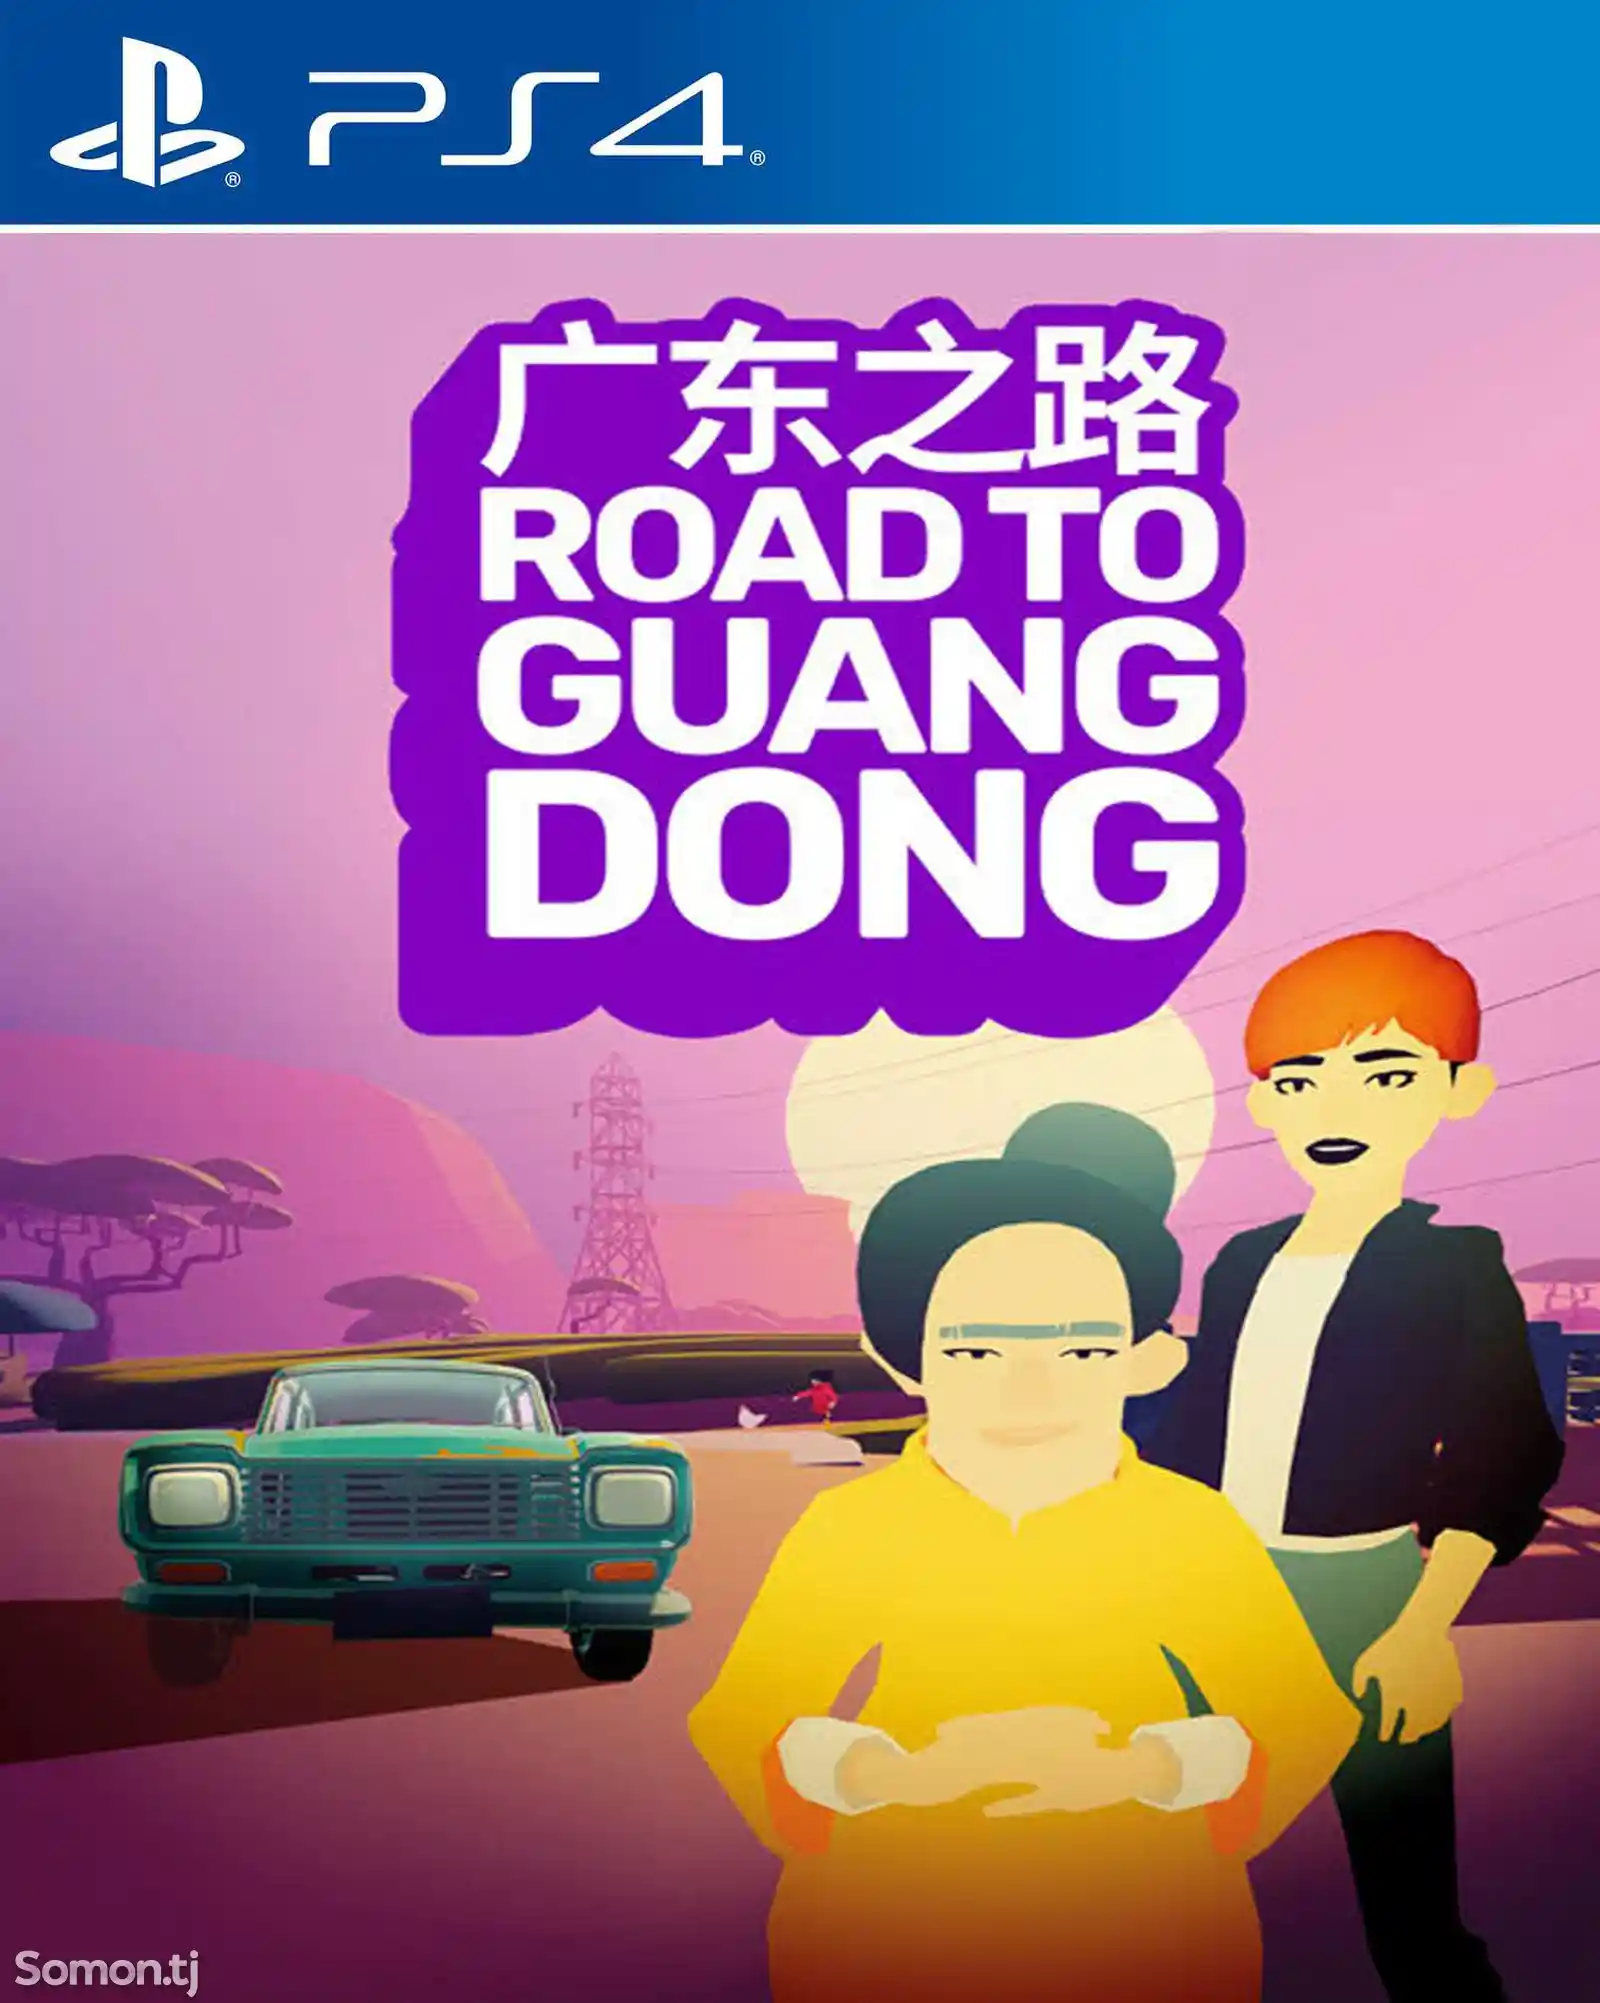 Игра Road to guangdong для PS-4 / 5.05 / 6.72 / 7.02 / 7.55 / 9.00 /-1